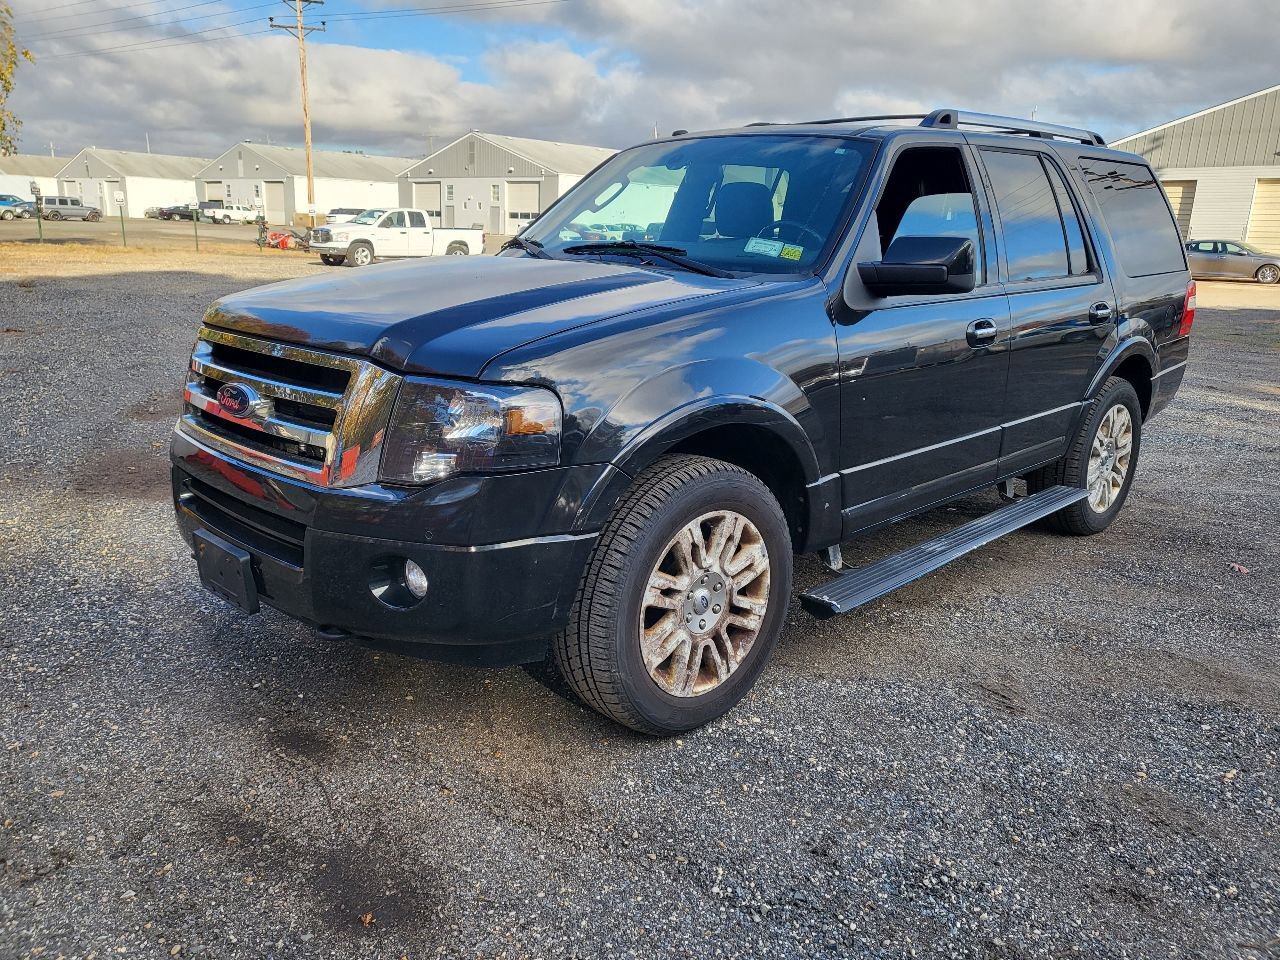 Used 2012 Ford Expedition for Sale Right Now - Autotrader